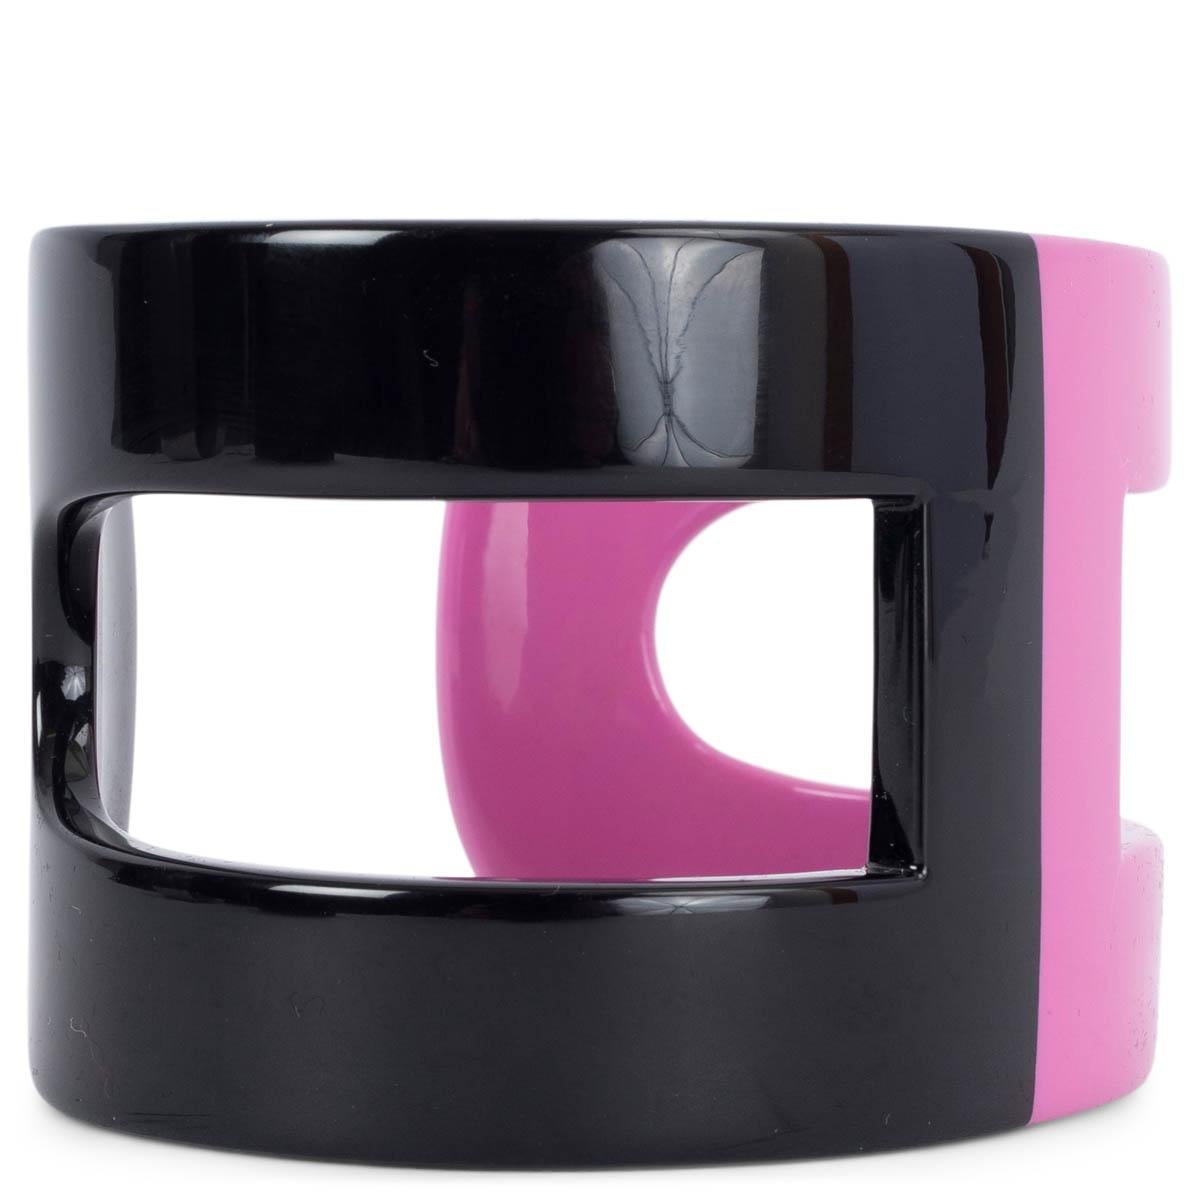 100% authentic Hermès Ano bracelet in pink and black lacquered wood in a wide bangle style. Has been worn and is in excellent condition. Comes with pouch. 

Measurements
Tag Size	OS
Height	5cm (2in)
Length	16cm (6.2in)

All our listings include only